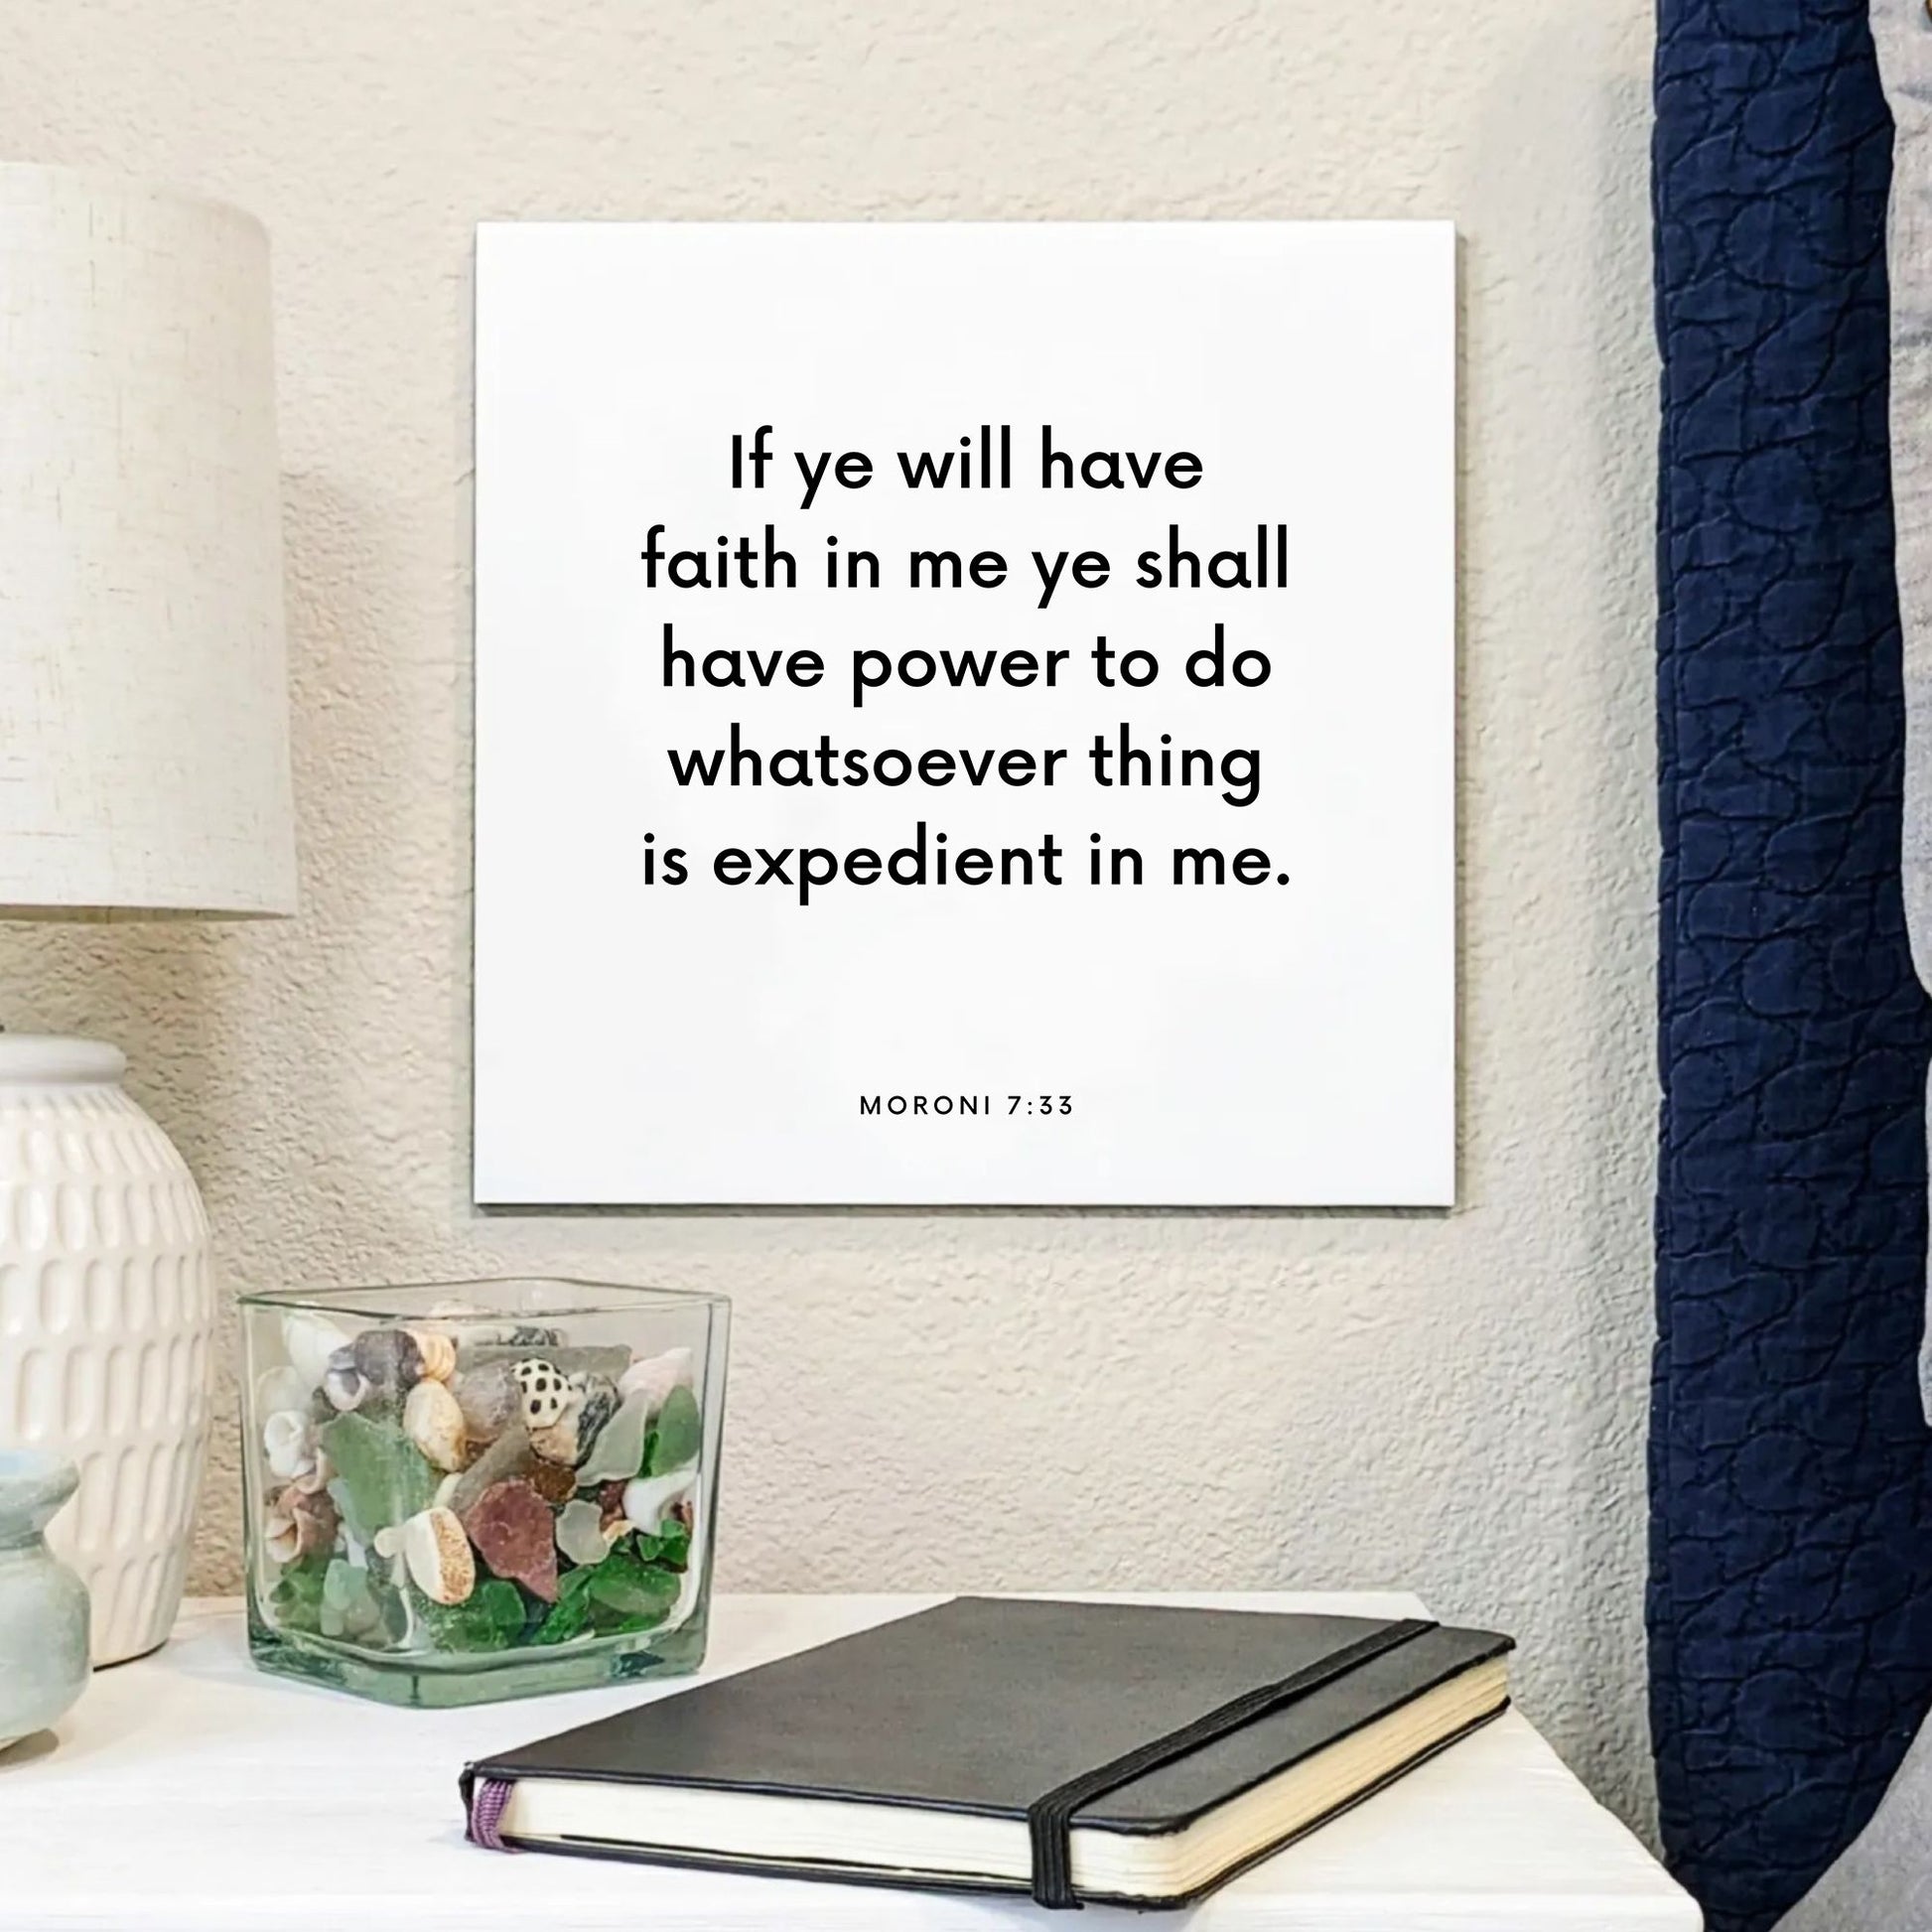 Bedside mouting of the scripture tile for Moroni 7:33 - "If ye will have faith in me ye shall have power"